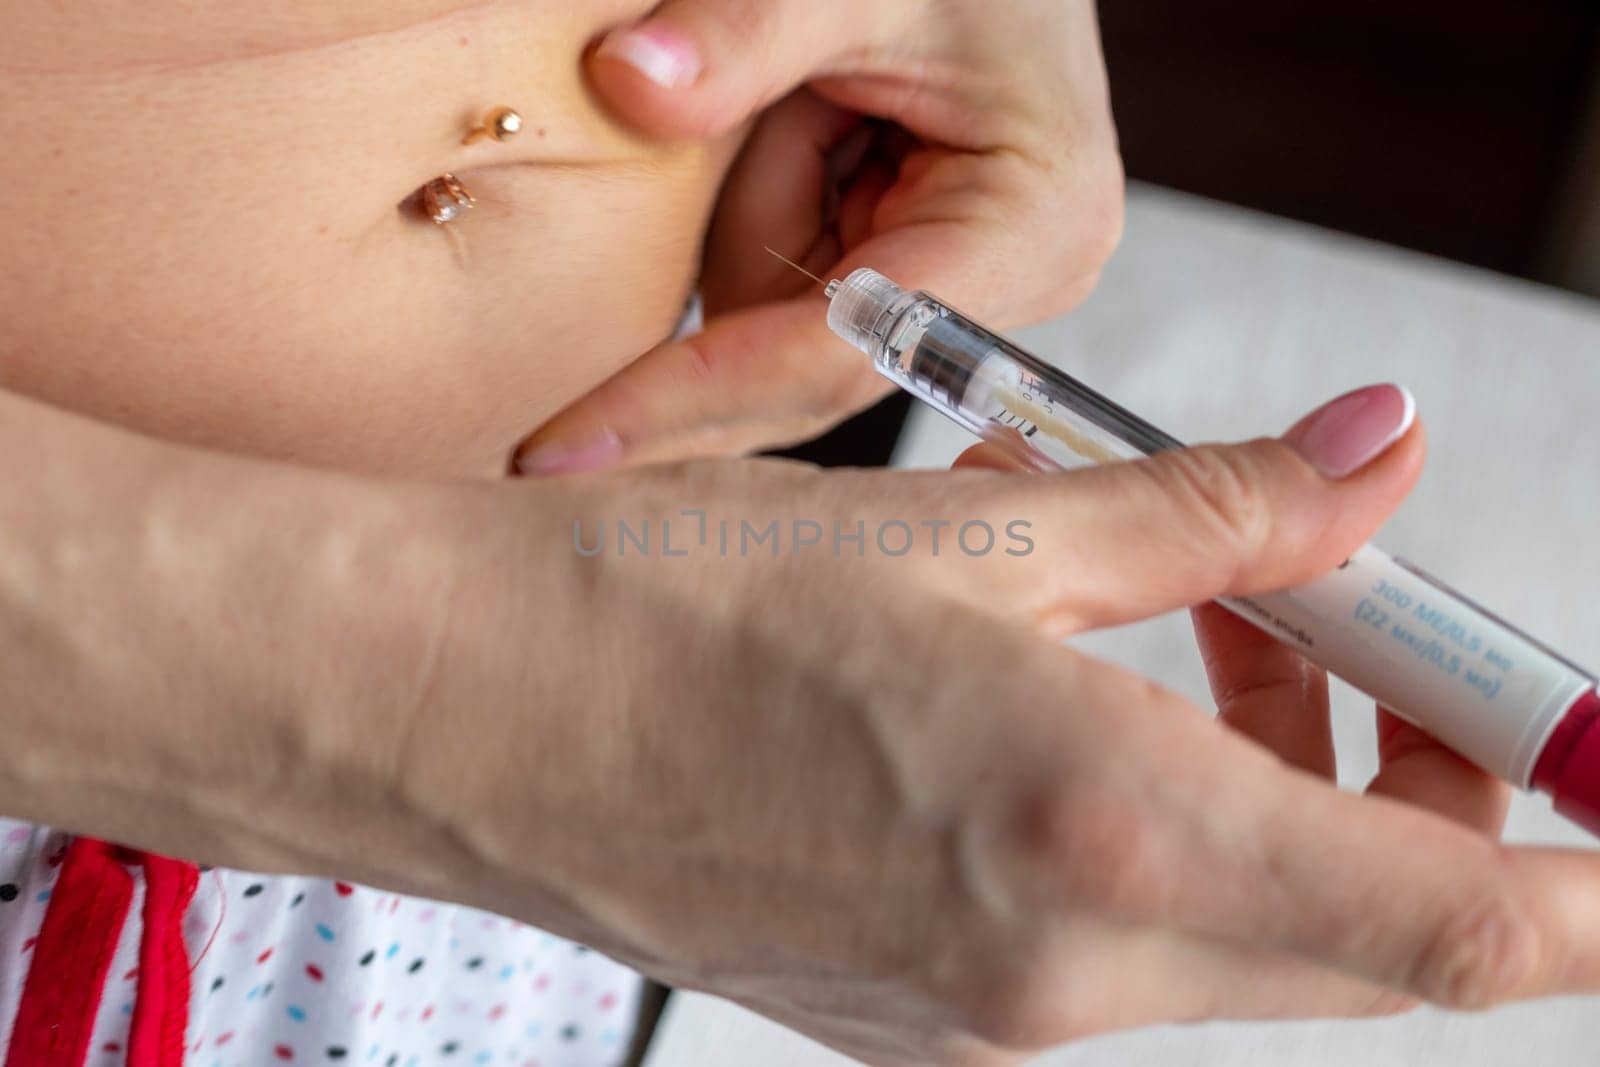 Close up shot of the woman with beautiful hands, preparing hormone medicine and injecting herself to the abdomen with pierced bellybutton.